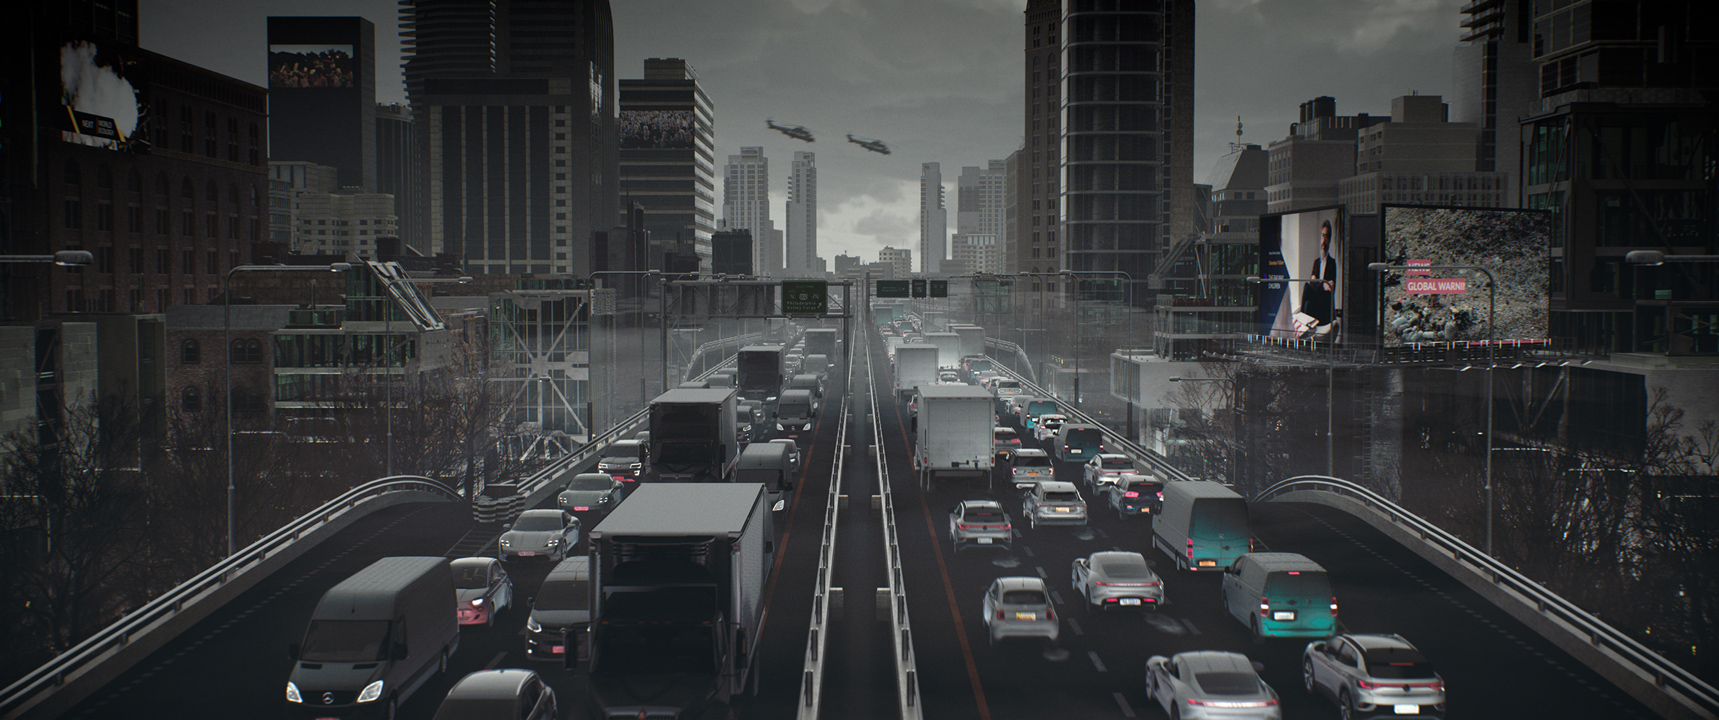 Ample_040_City_Highway_Polluted-1